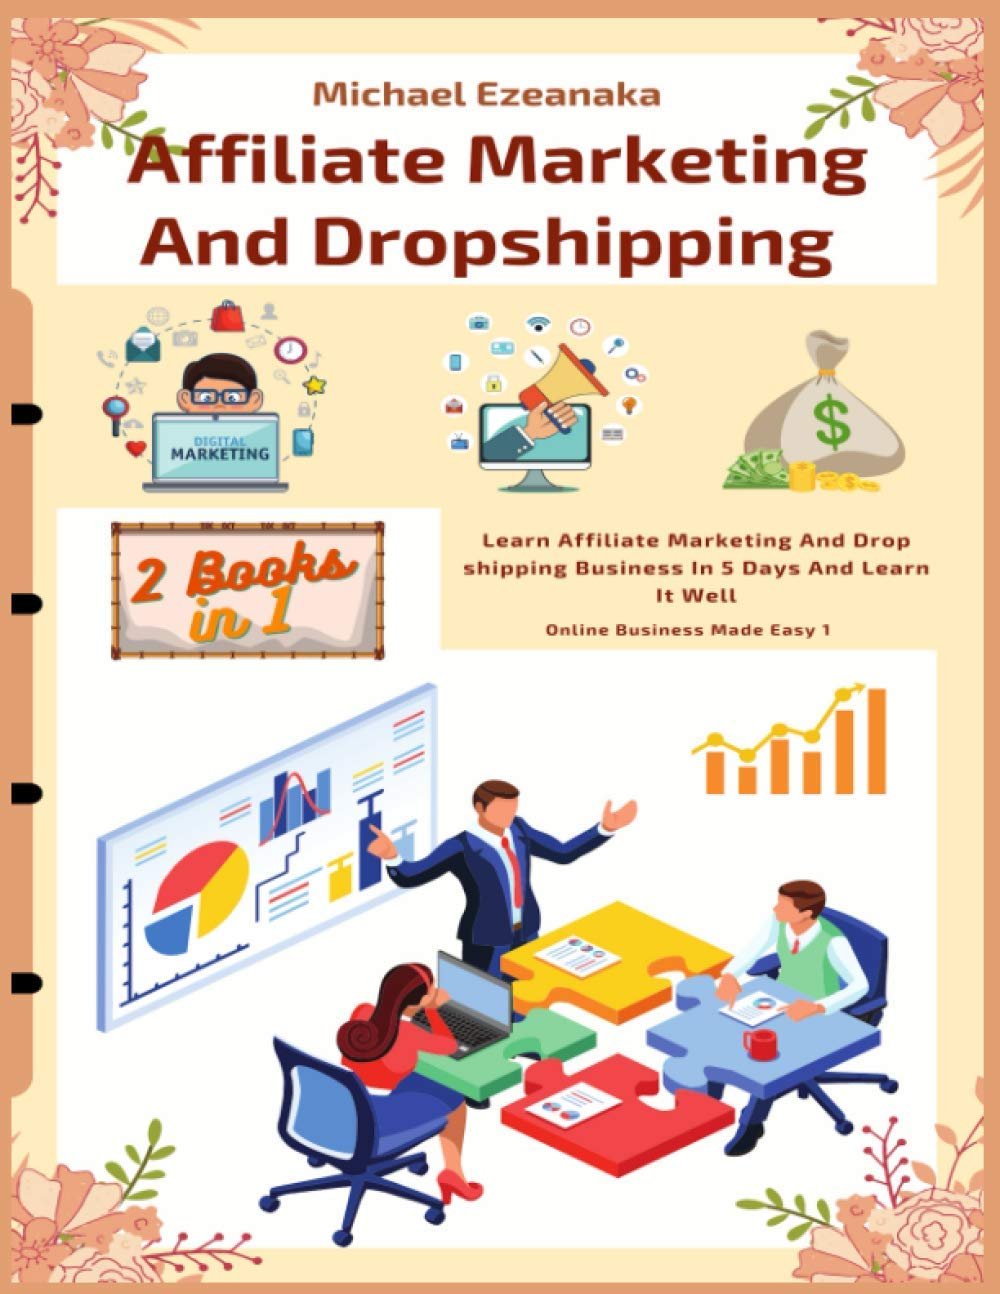 Affiliate Marketing And Dropshipping Review